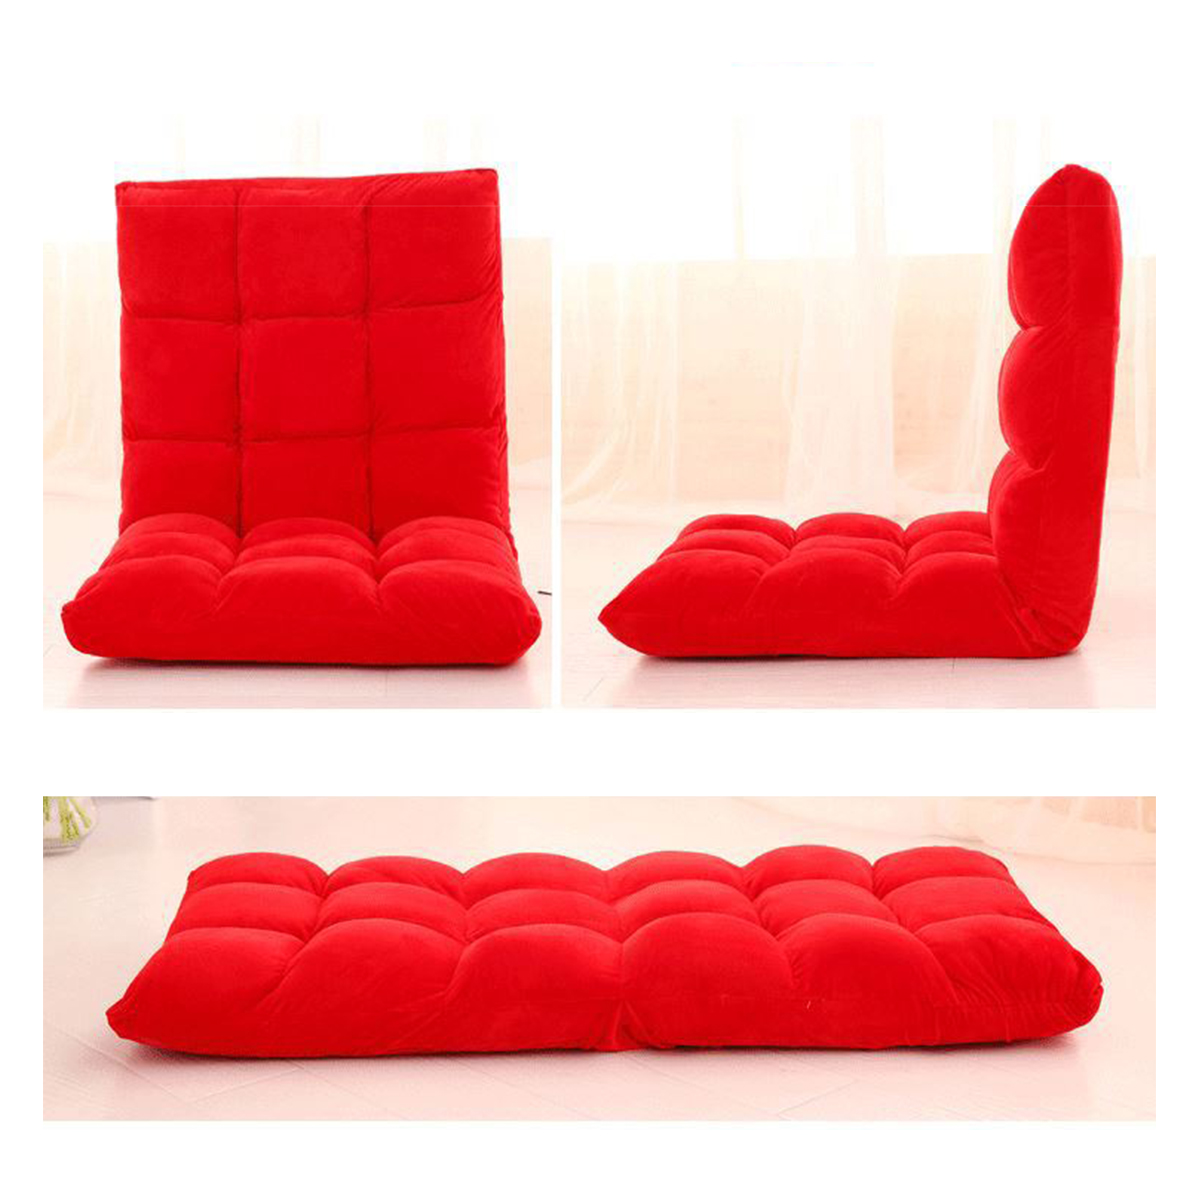 Adjustable Lazy Sofa Cushioned Floor Lounge Chair Living Room Leisure Chaise Chair 8